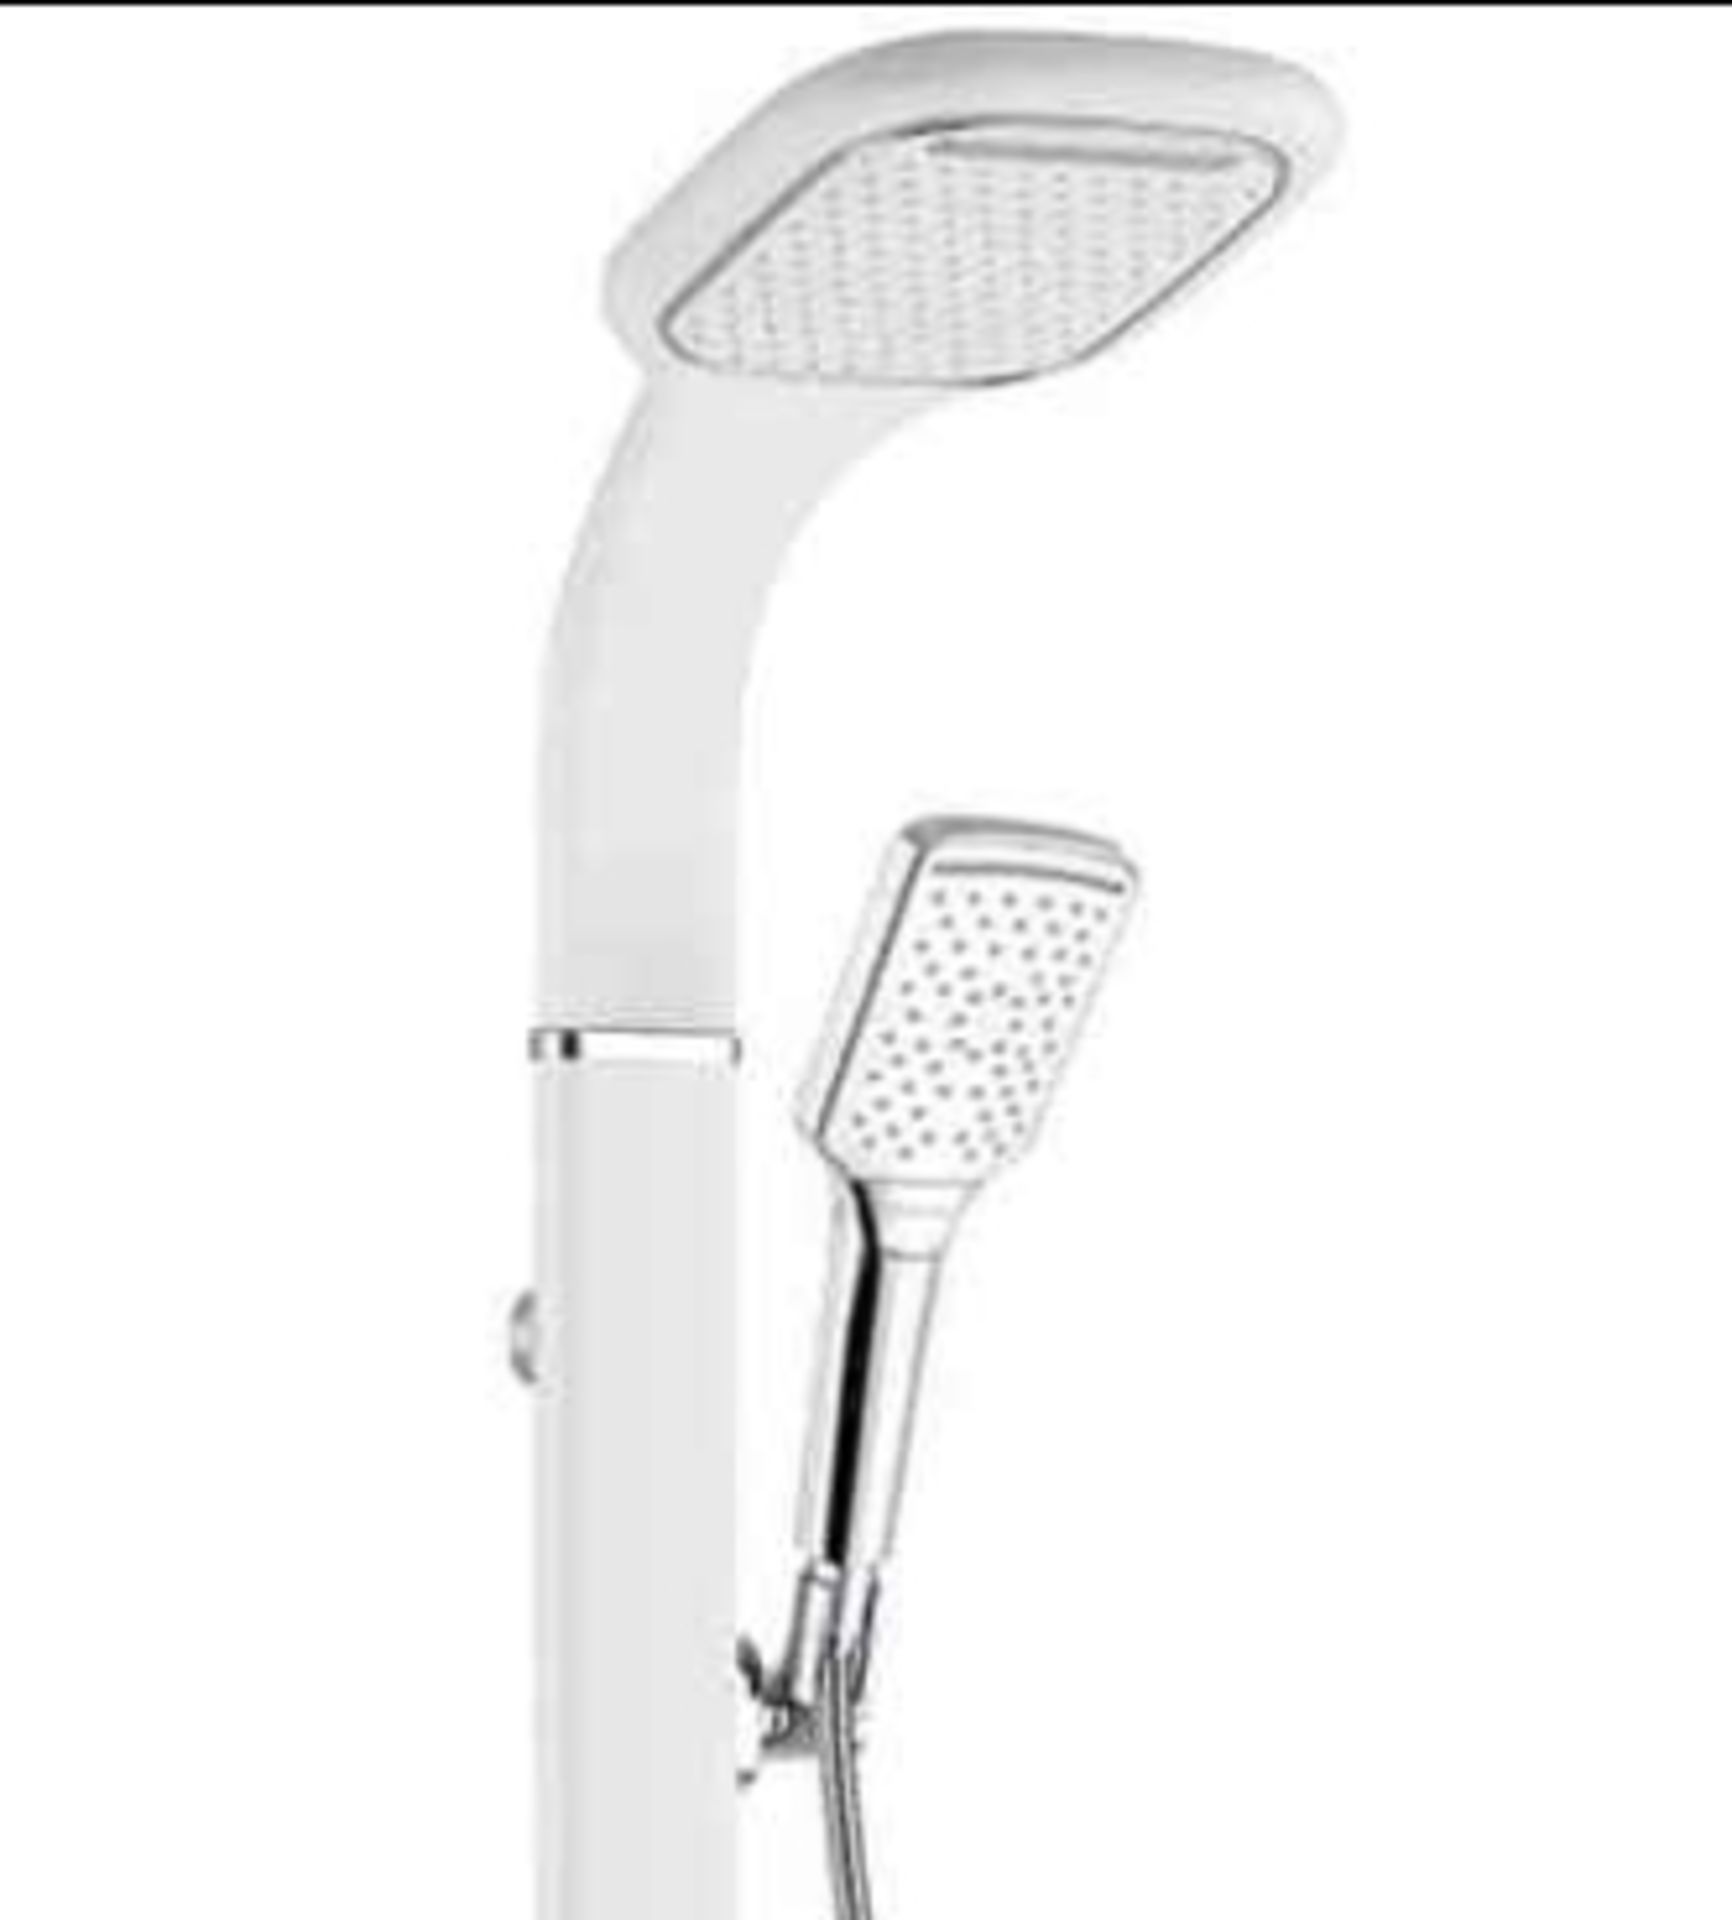 1 x Synergy Nubian White Thermostatic Shower Panel Kit and Handset - New Boxed Stock - RRP £549! - Image 5 of 6